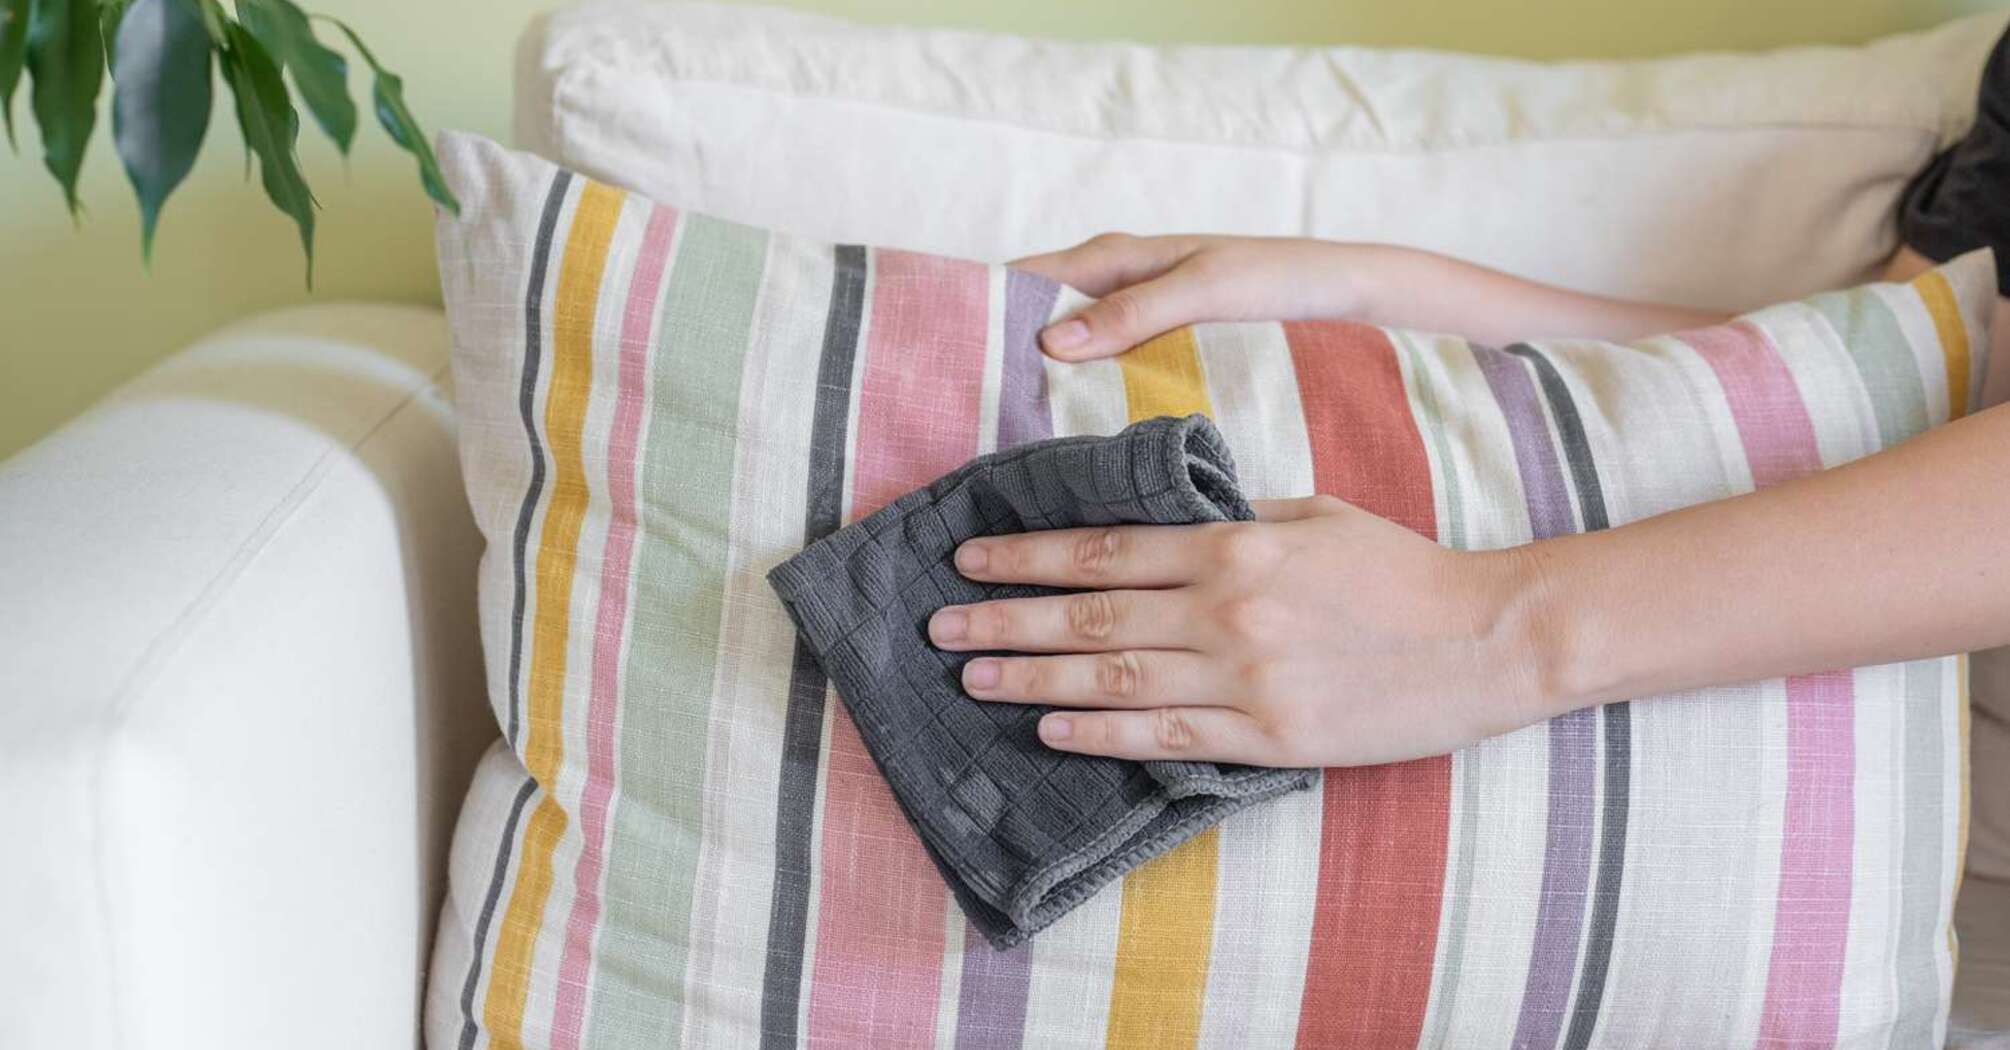 How to properly clean and care for pillows